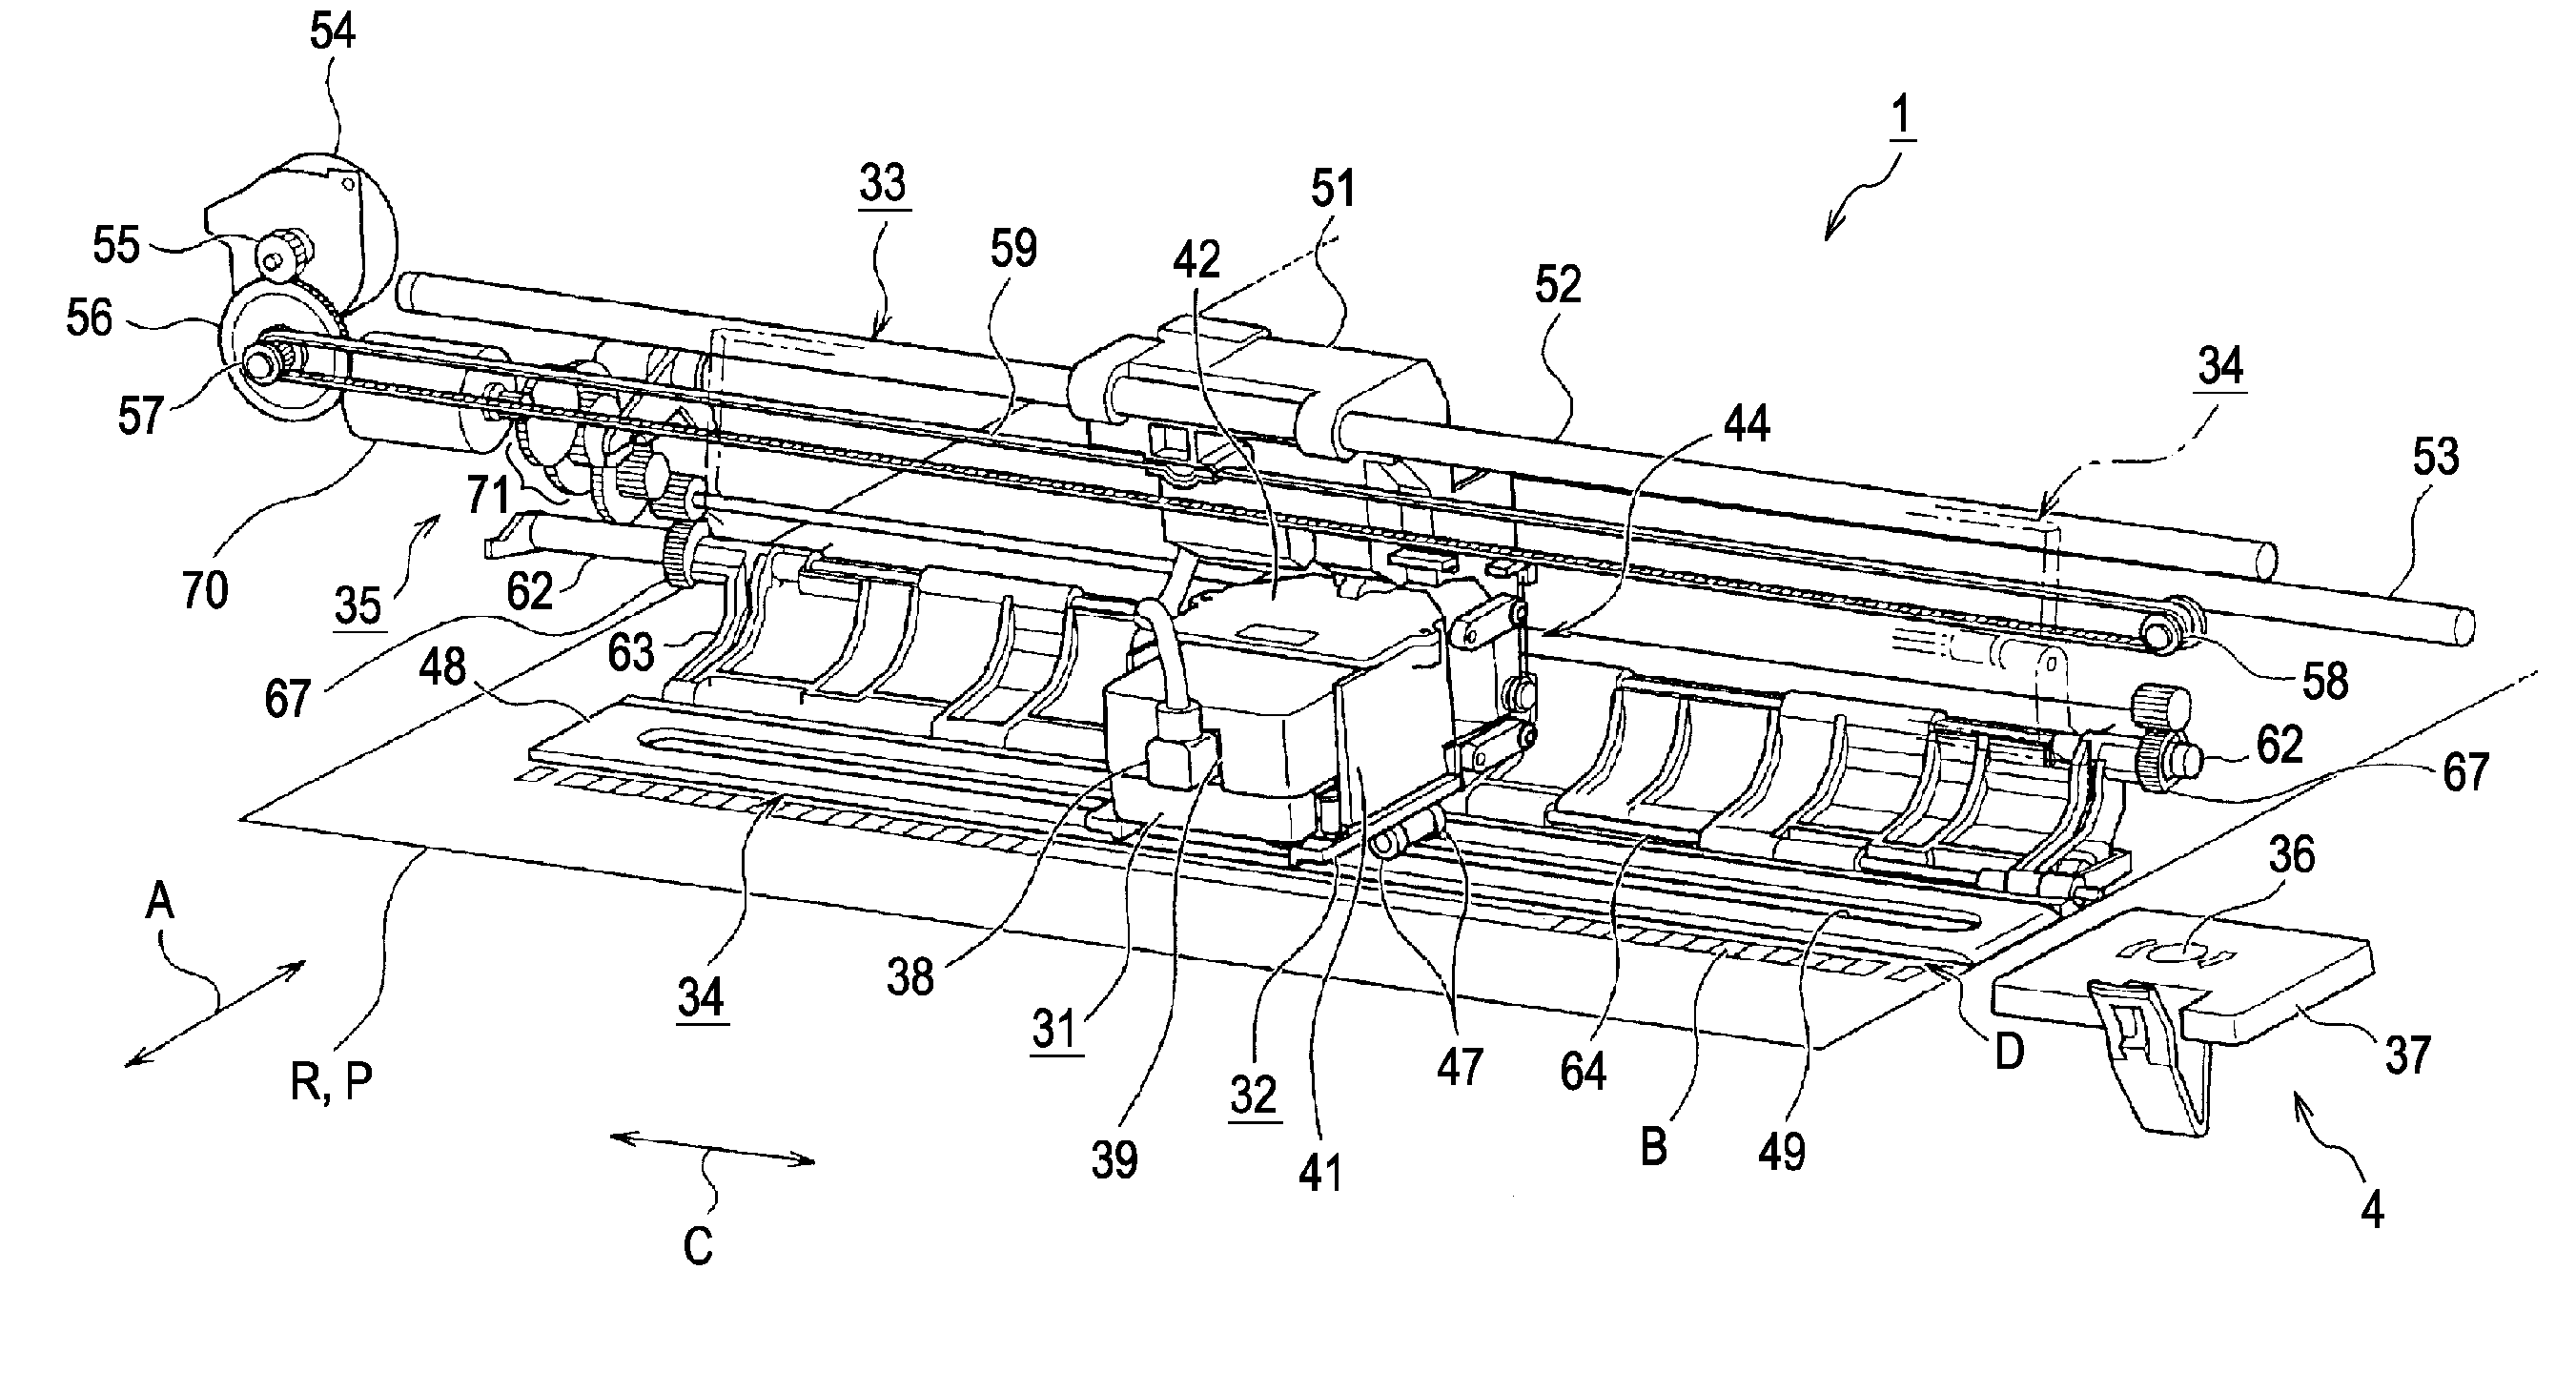 Unit for measuring color and recording apparatus